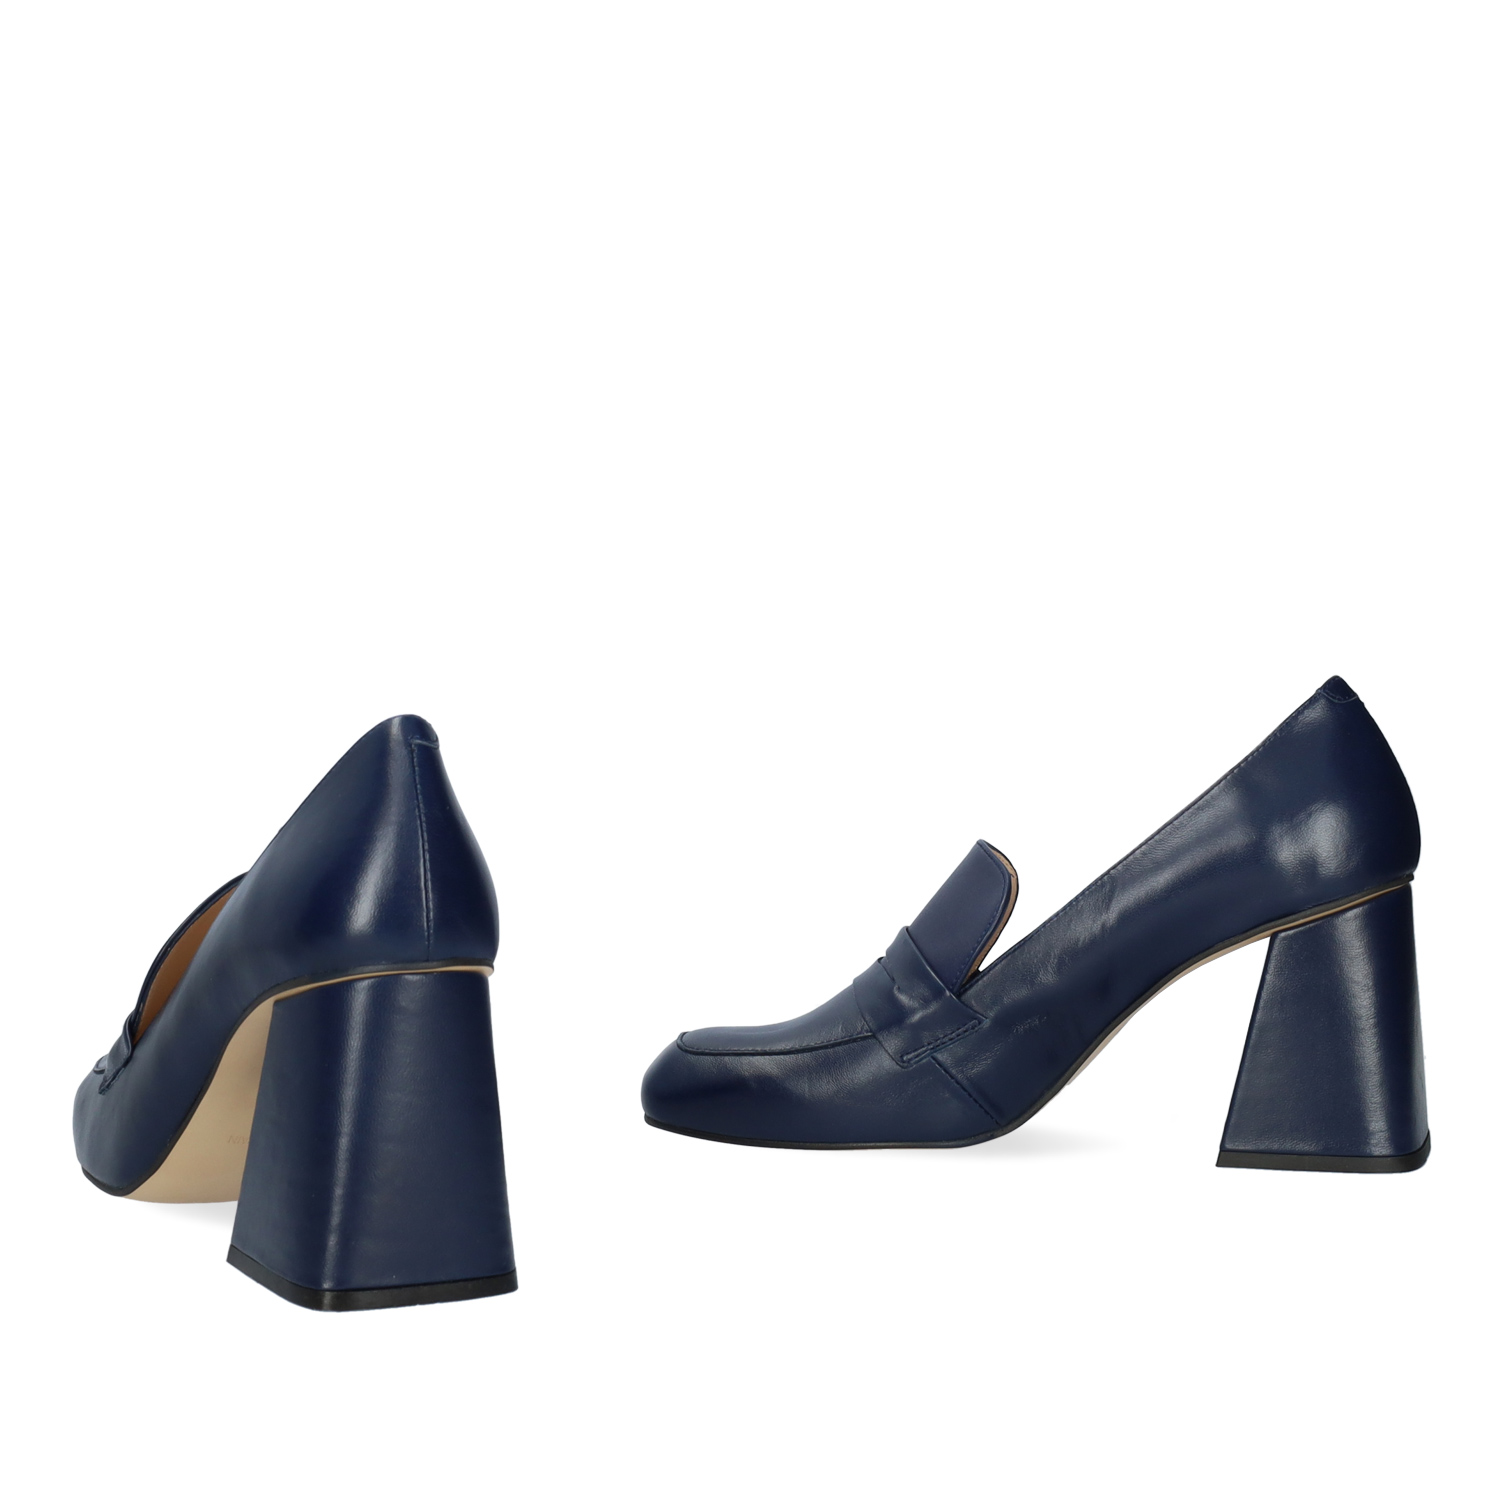 Heeled loafers in navy leather 